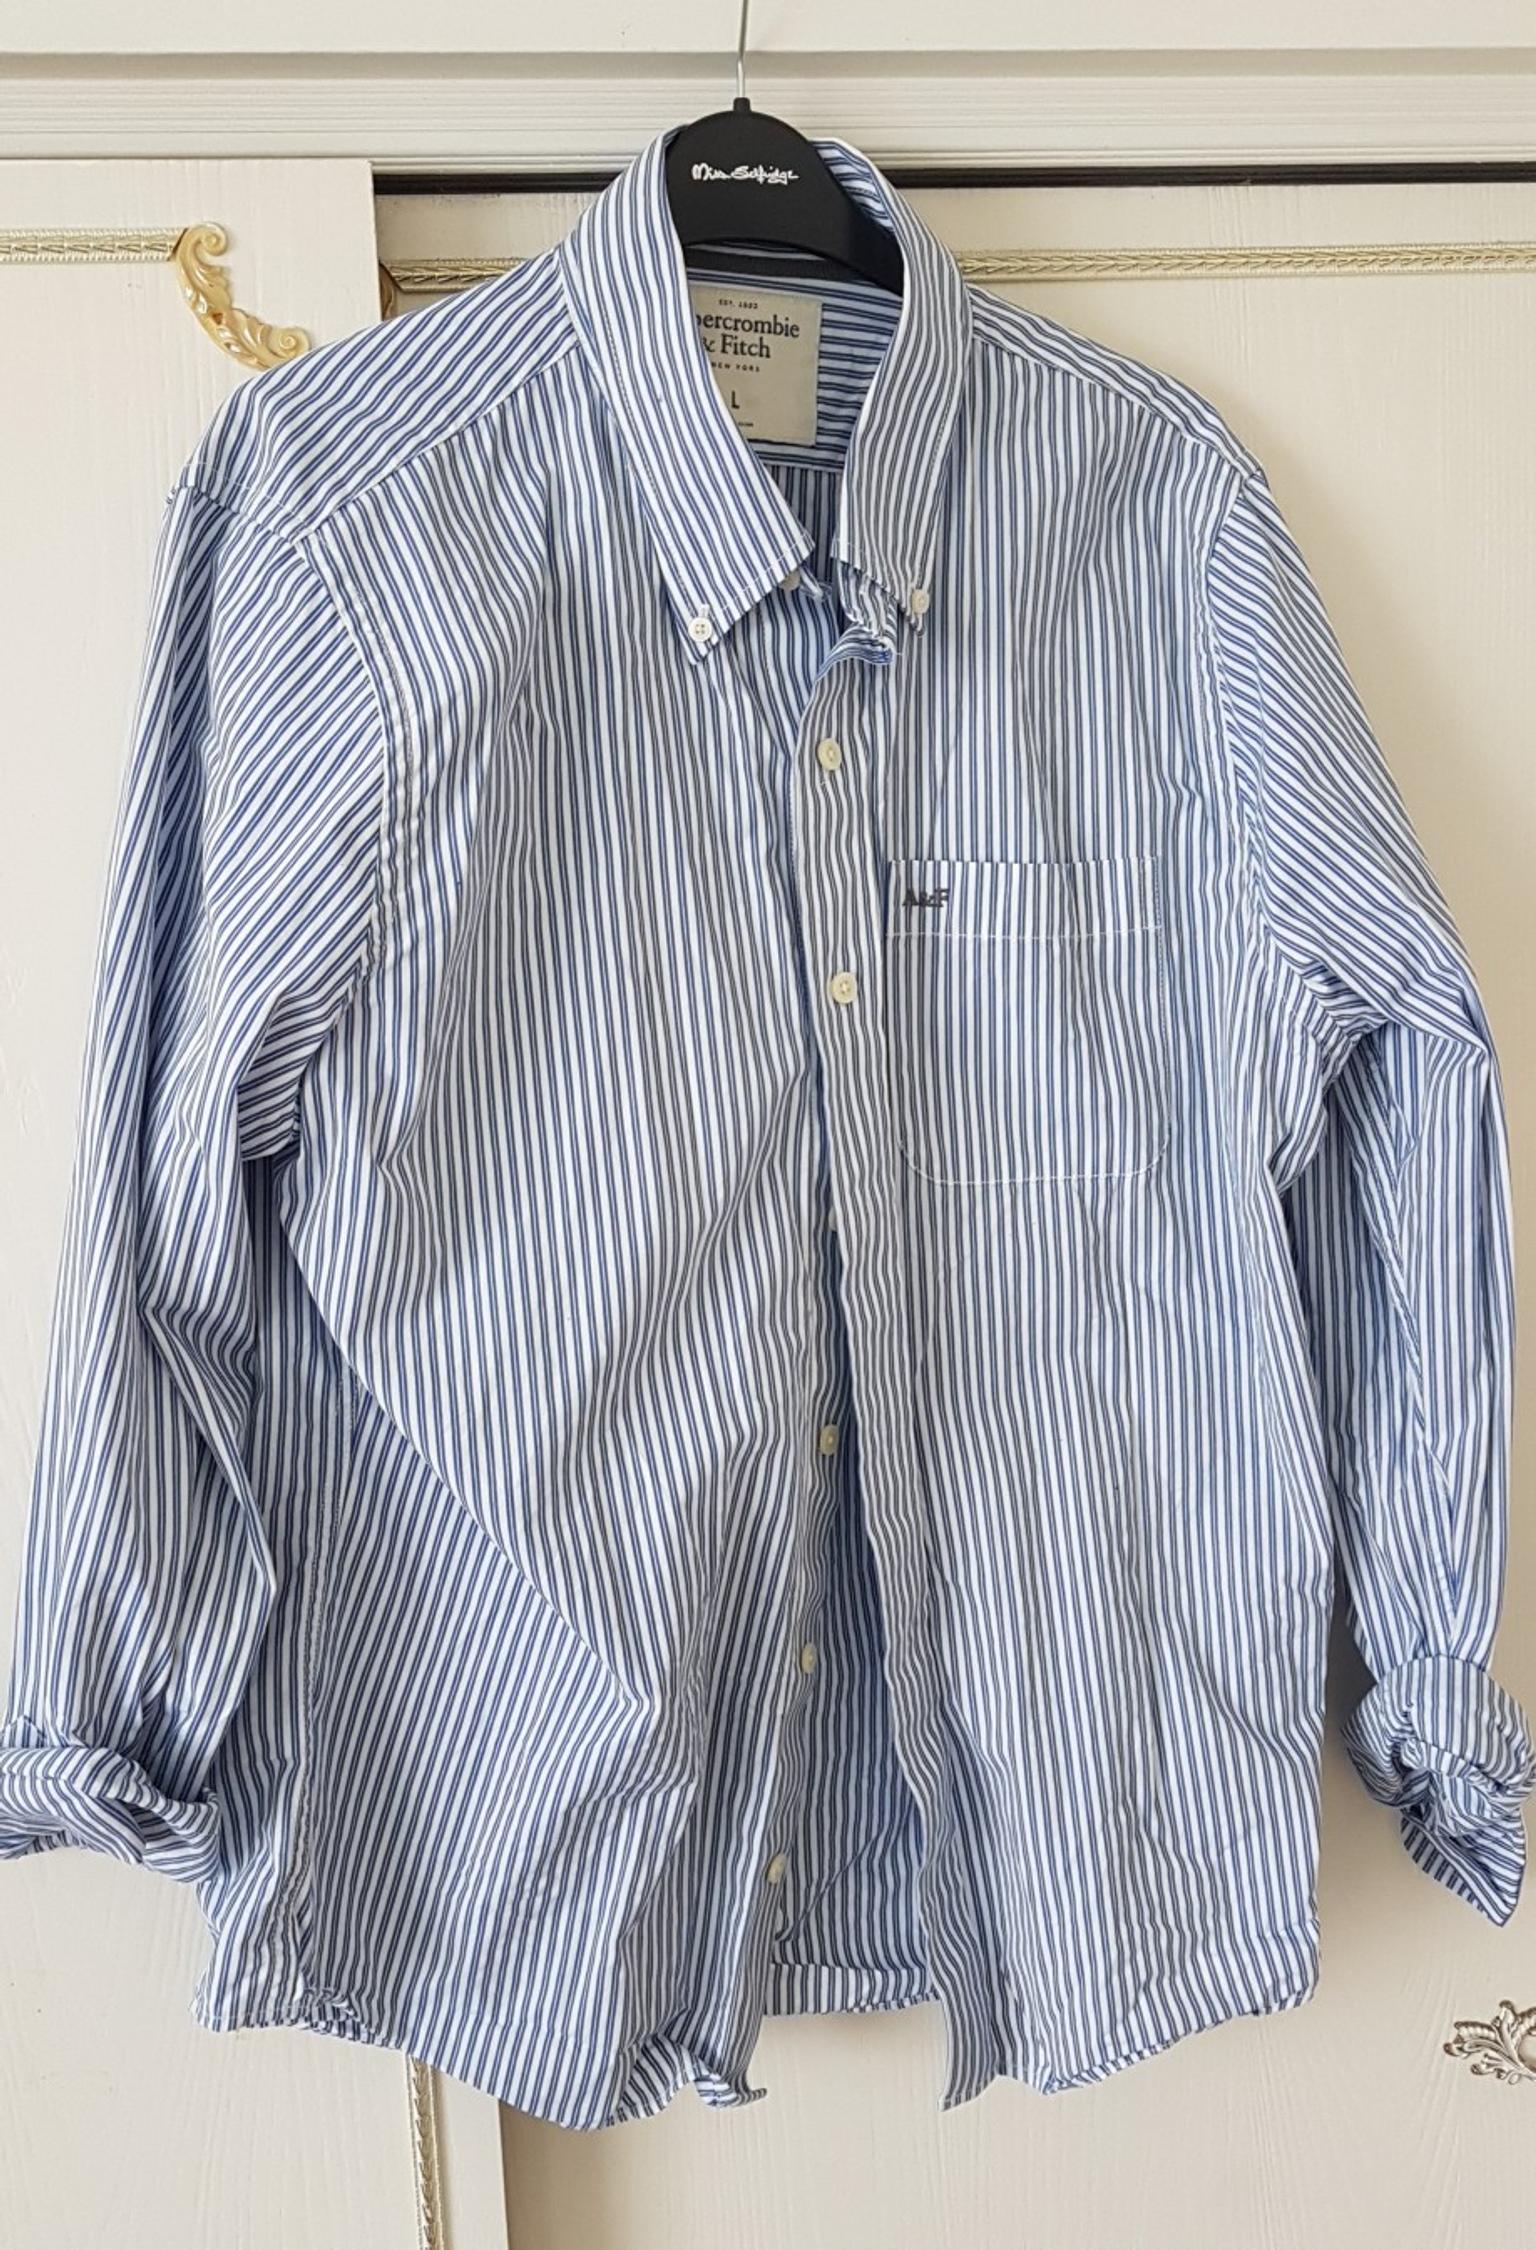 abercrombie fitch shirts mens